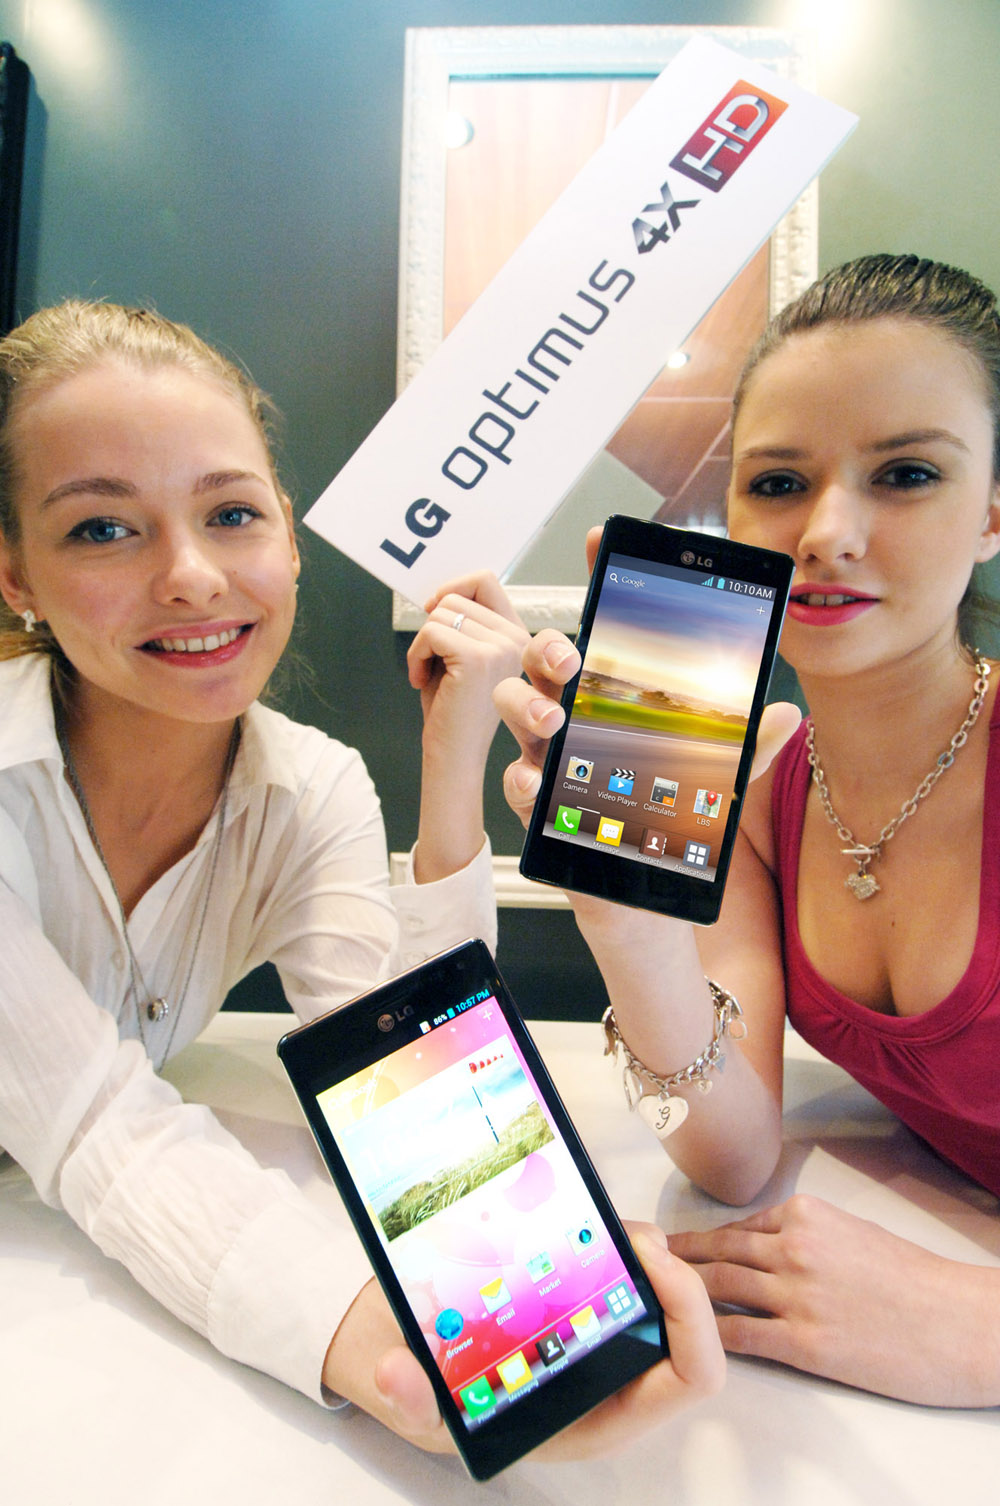 Two models holding up two LG QUAD-CORE smartphones and a promotional panel engraved with the brand name LG OPTMUS 4X HD